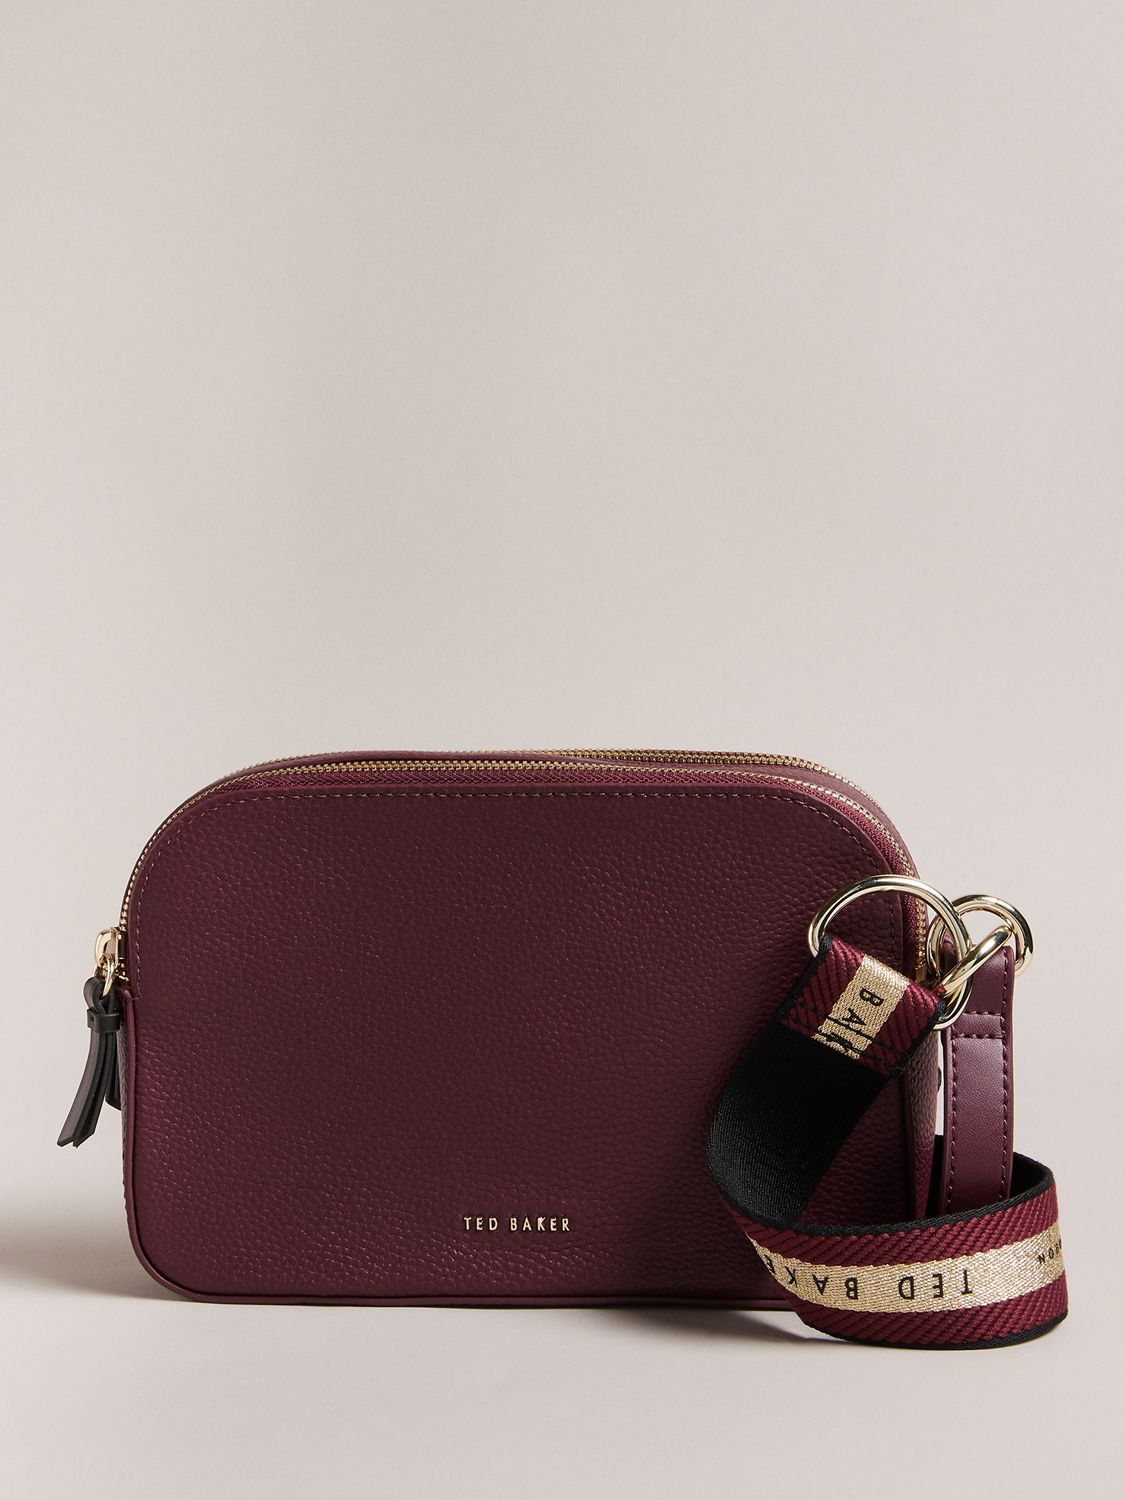 Ted Baker Darcelo Grained Leather Camera Bag, Burgunday, One Size